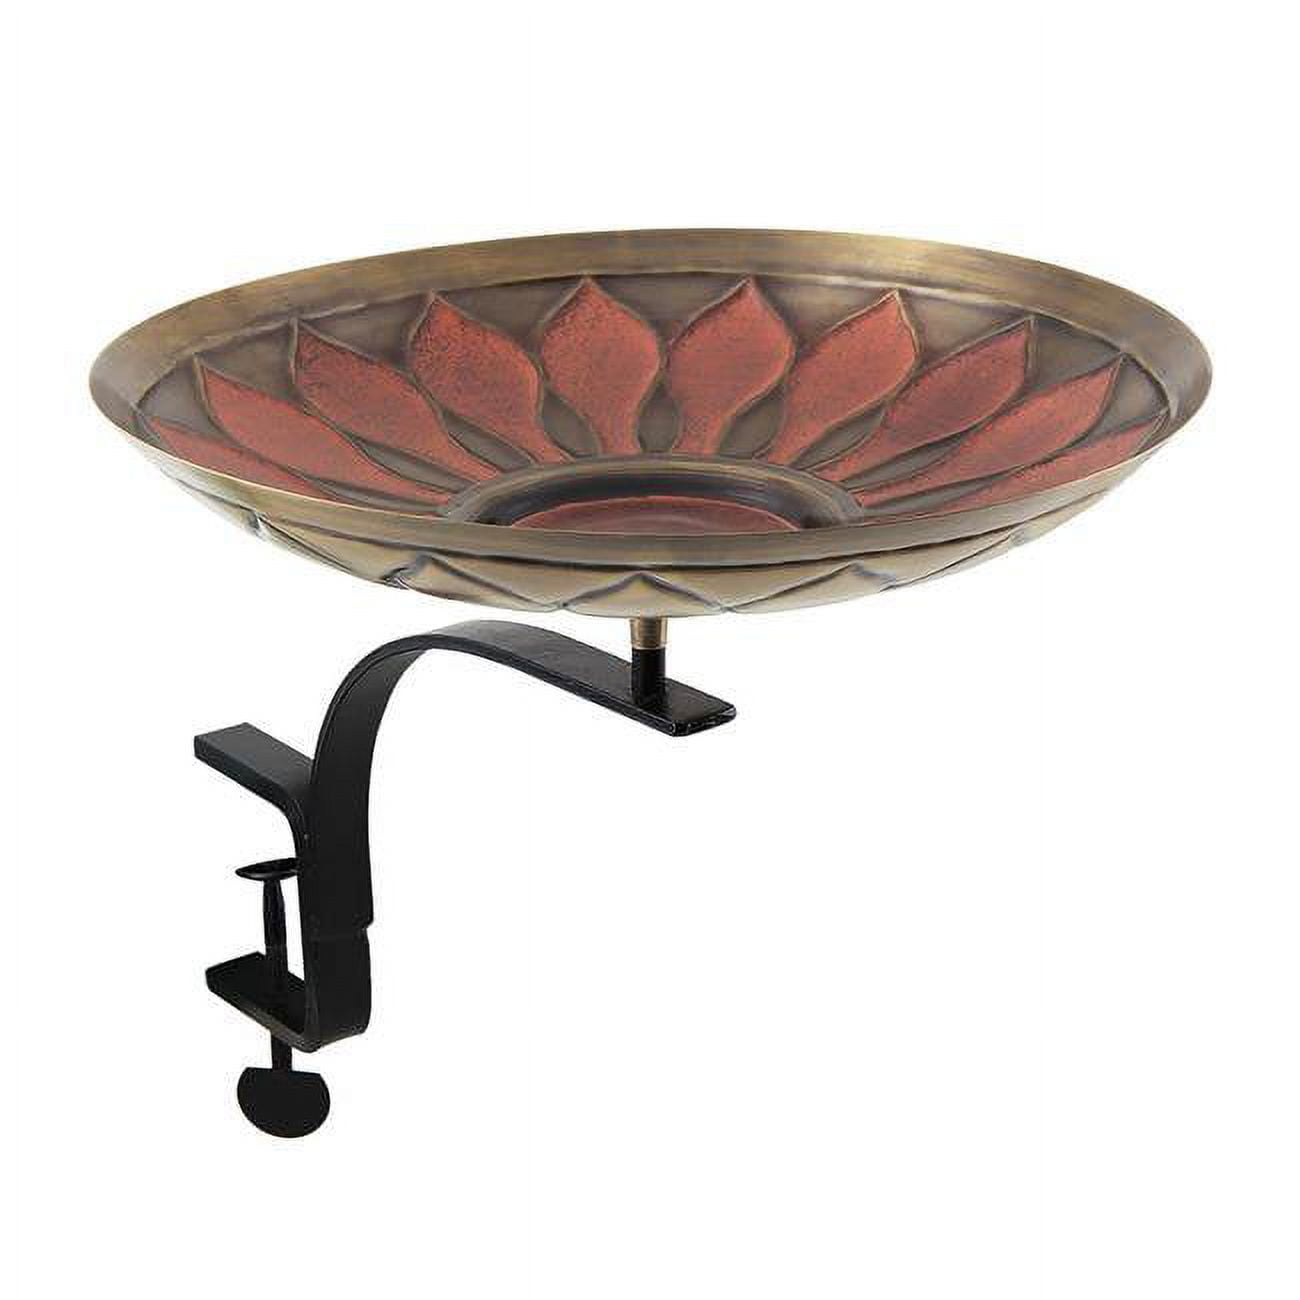 Picture of Achla BB-09R-RM Red African Daisy Birdbath with Rail Mount Bracket